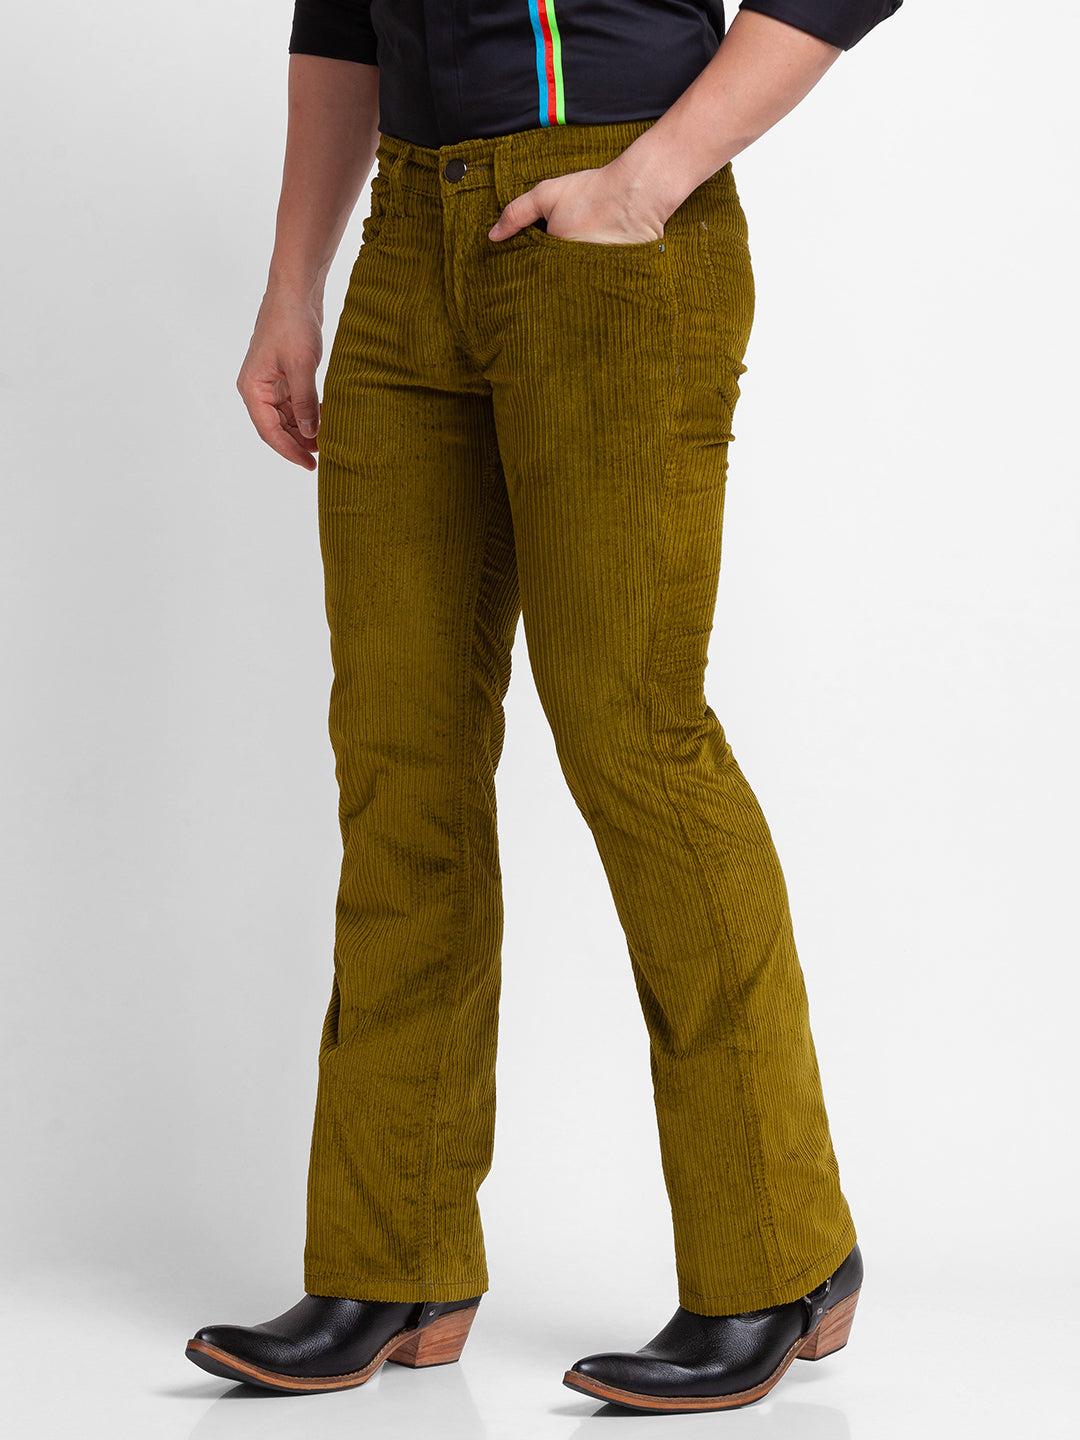 Needlecord Trousers  Teal